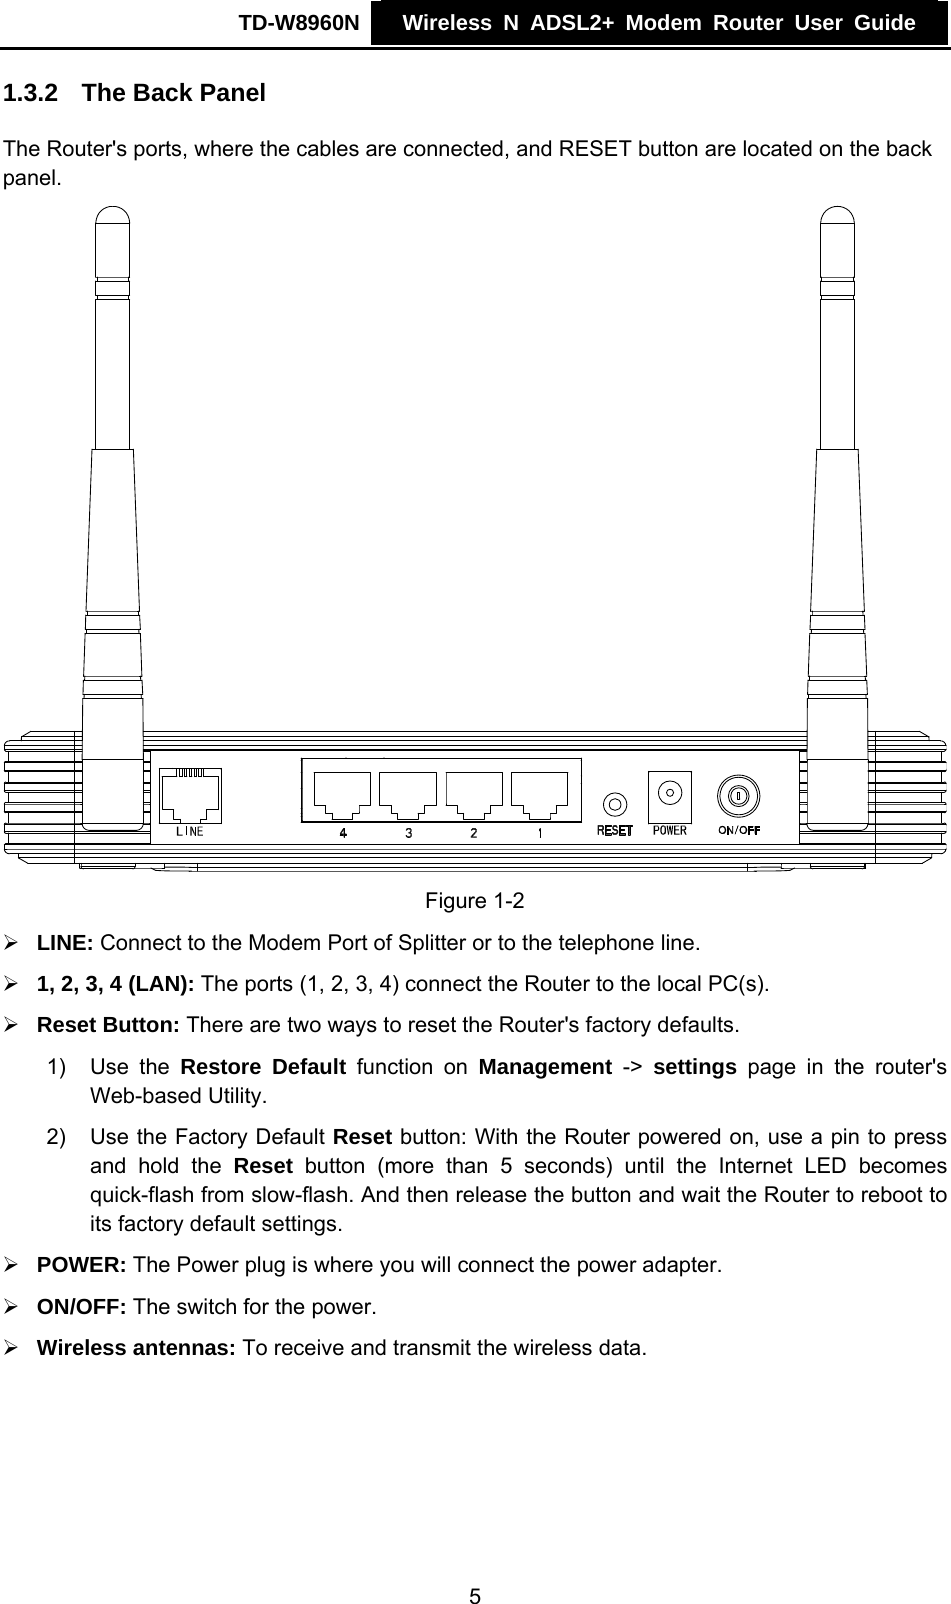 TD-W8960N    Wireless N ADSL2+ Modem Router User Guide    1.3.2  The Back Panel The Router&apos;s ports, where the cables are connected, and RESET button are located on the back panel.  Figure 1-2 ¾ LINE: Connect to the Modem Port of Splitter or to the telephone line. ¾ 1, 2, 3, 4 (LAN): The ports (1, 2, 3, 4) connect the Router to the local PC(s). ¾ Reset Button: There are two ways to reset the Router&apos;s factory defaults. 1) Use the Restore Default function on Management -&gt; settings page in the router&apos;s Web-based Utility. 2)  Use the Factory Default Reset button: With the Router powered on, use a pin to press and hold the Reset button (more than 5 seconds) until the Internet LED becomes quick-flash from slow-flash. And then release the button and wait the Router to reboot to its factory default settings. ¾ POWER: The Power plug is where you will connect the power adapter. ¾ ON/OFF: The switch for the power. ¾ Wireless antennas: To receive and transmit the wireless data. 5 